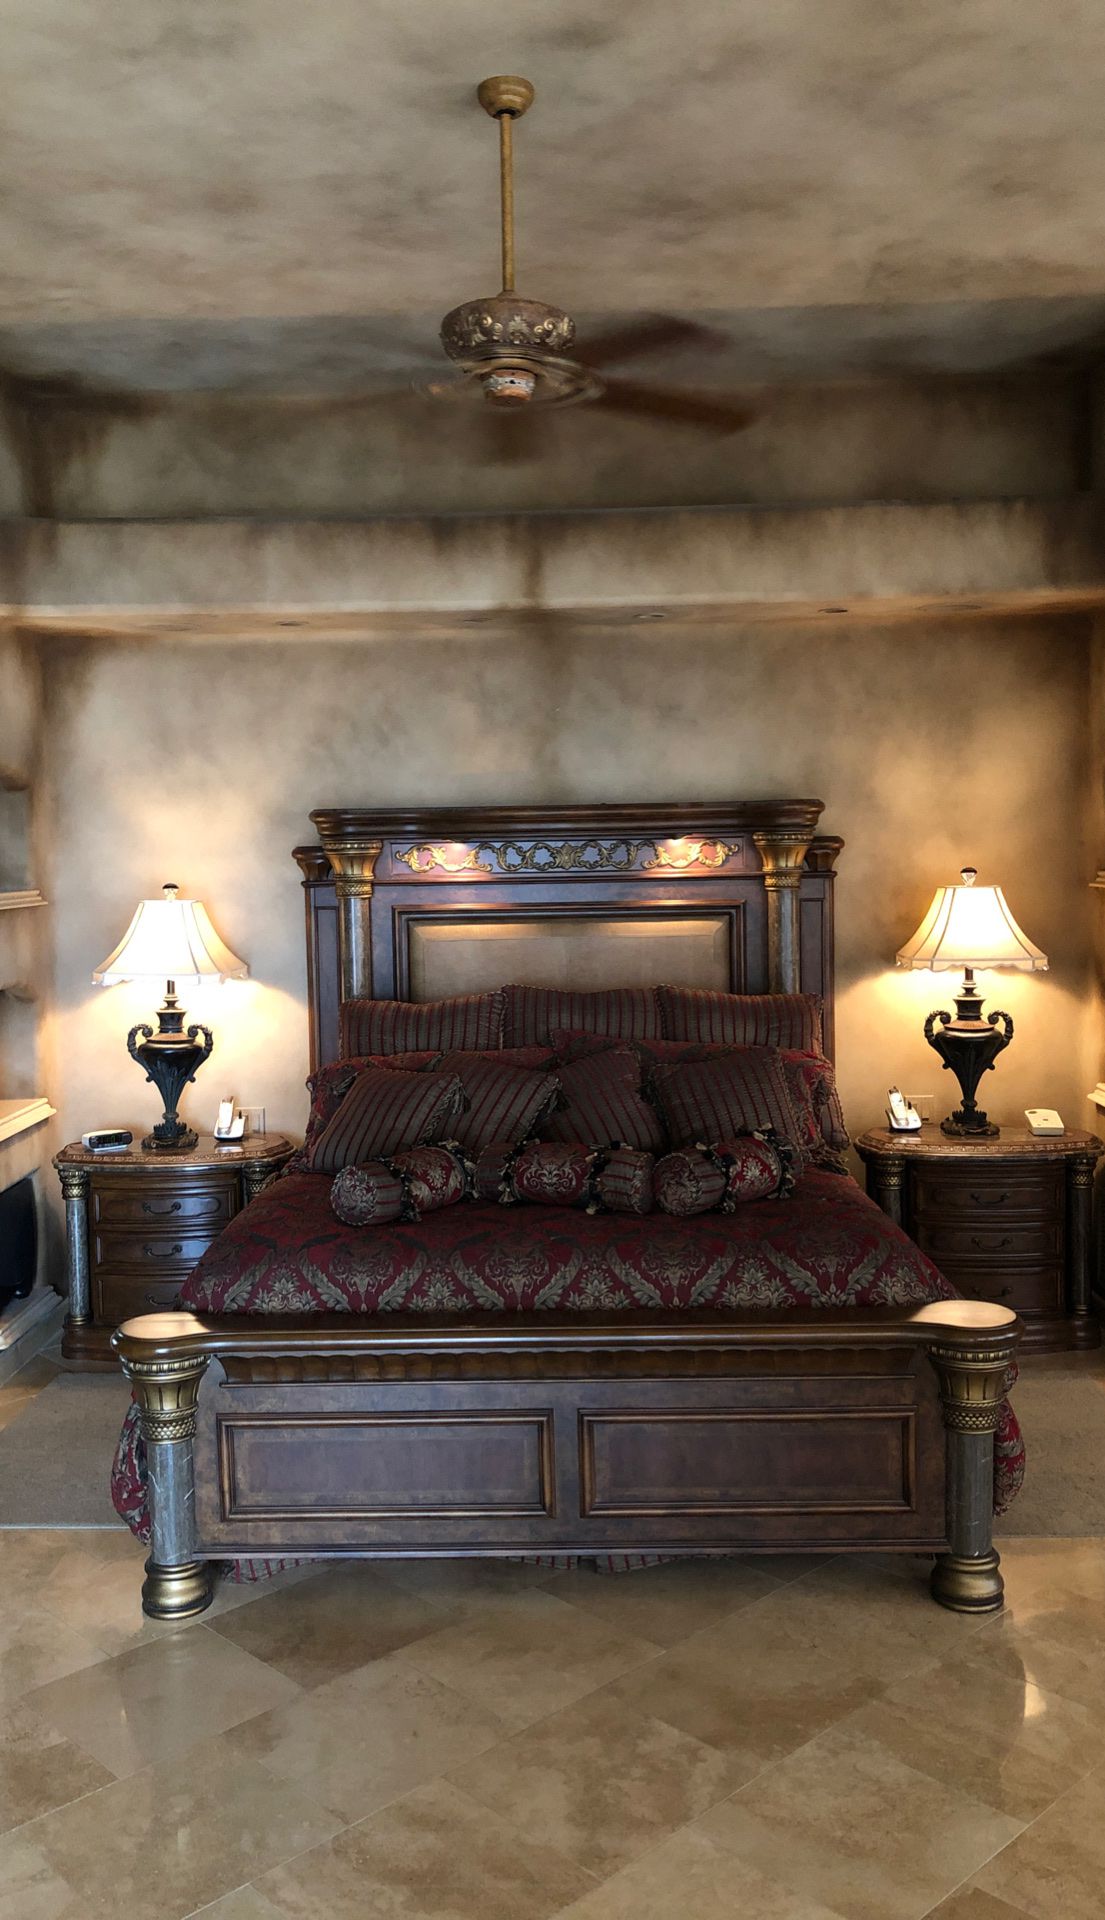 Luxury king size master bedroom set complete with nightstands and armoire